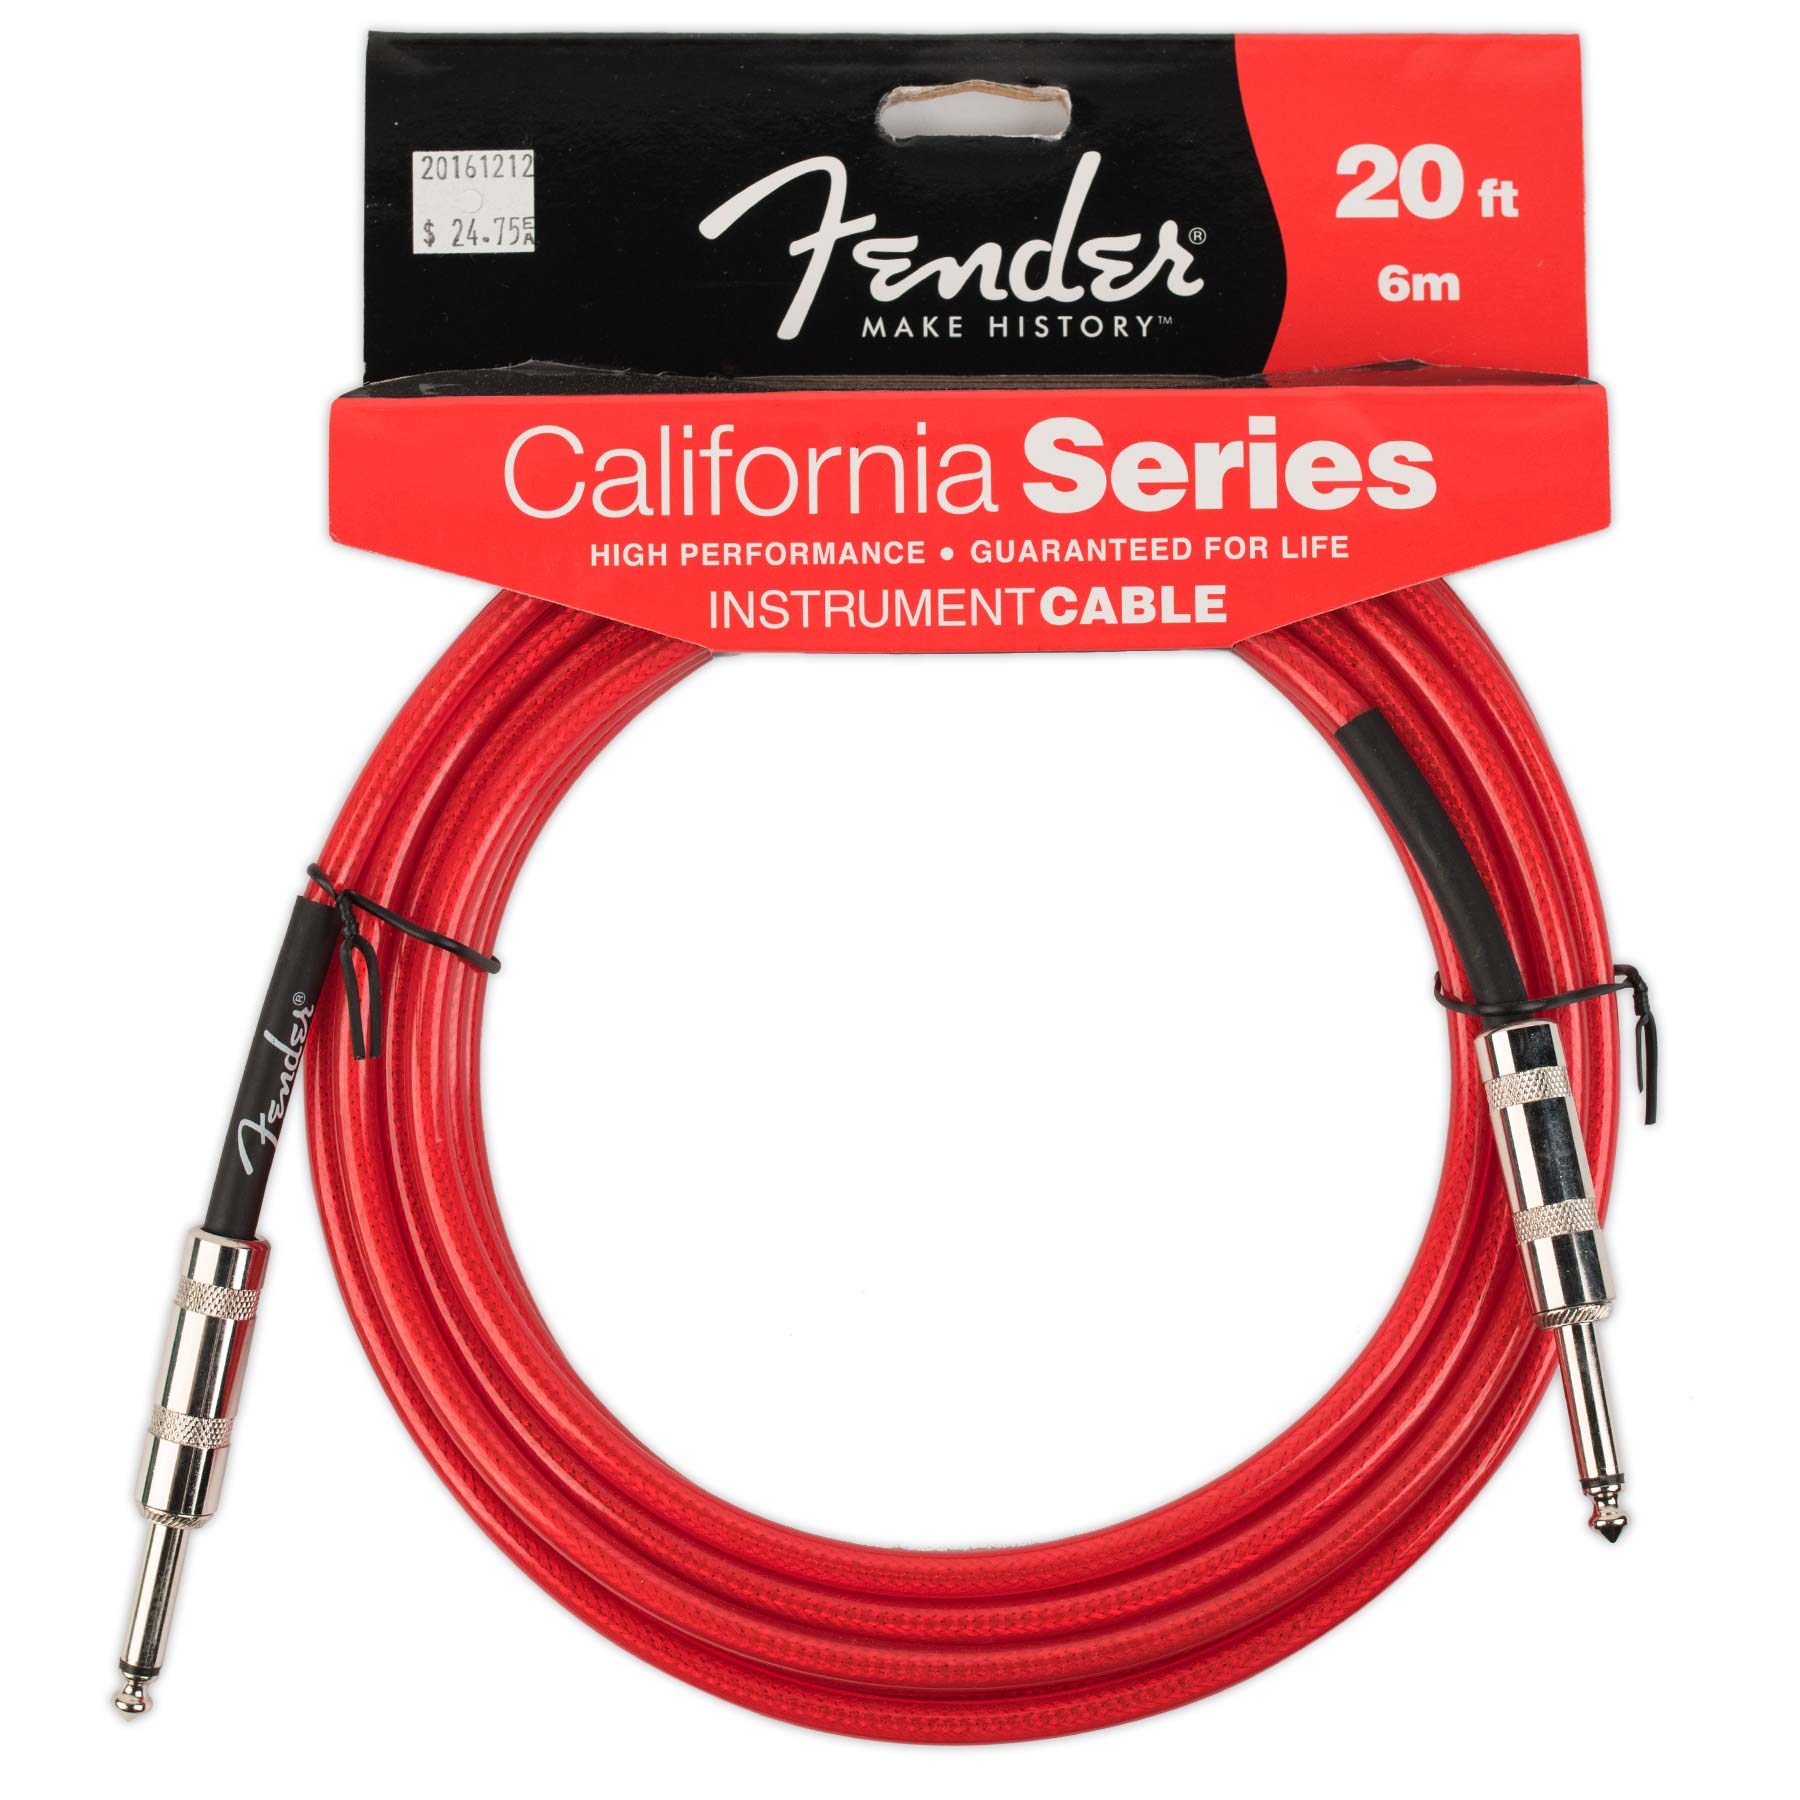 FENDER CALIFORNIA SERIES 20' INSTRUMENT CABLE CANDY APPLE RED